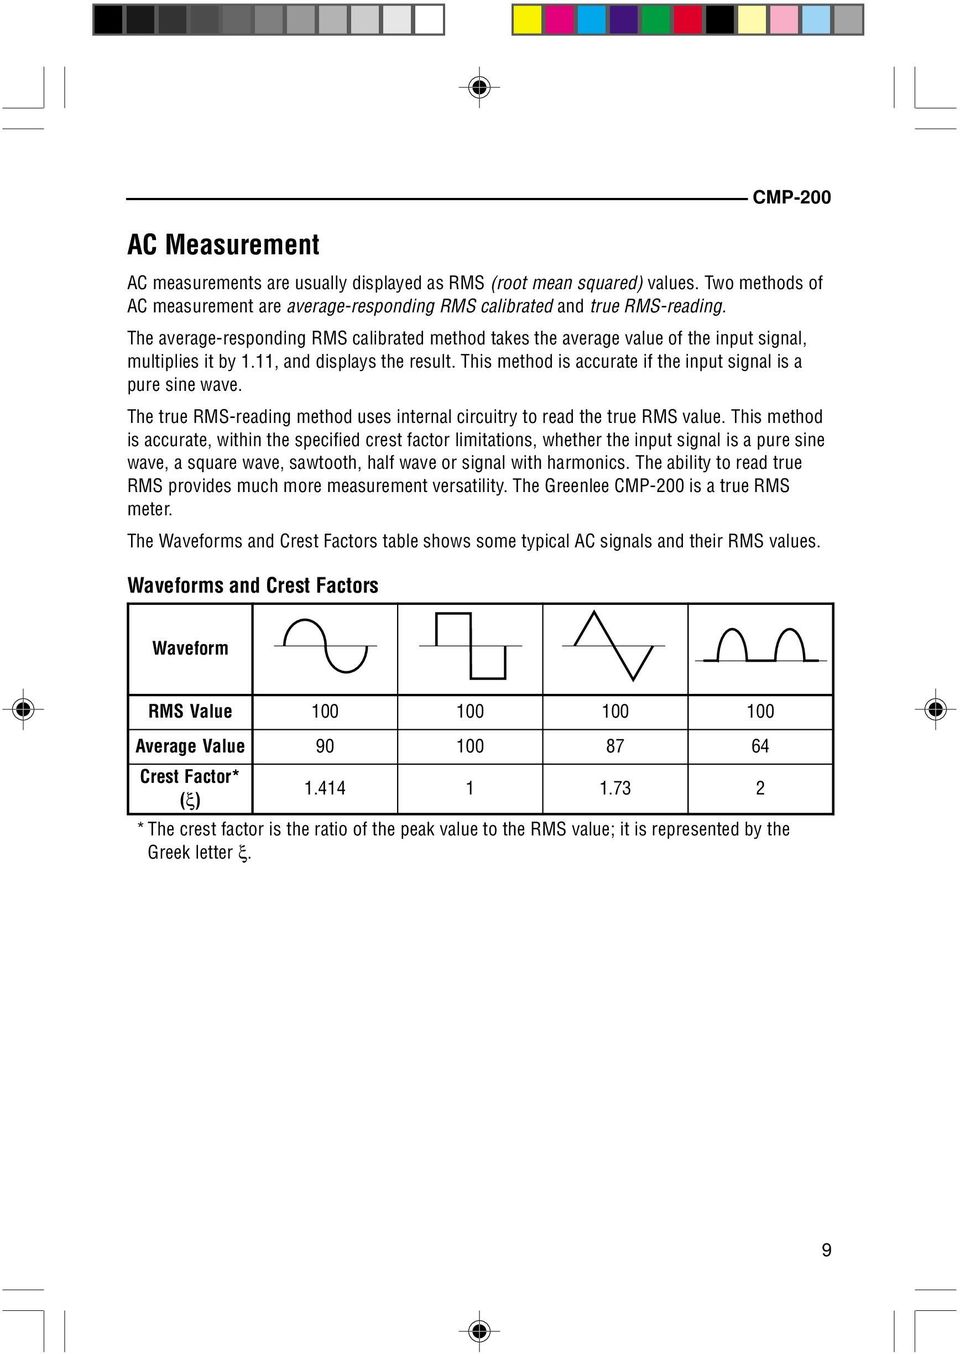 This method is accurate if the input signal is a pure sine wave. The true RMS-reading method uses internal circuitry to read the true RMS value.